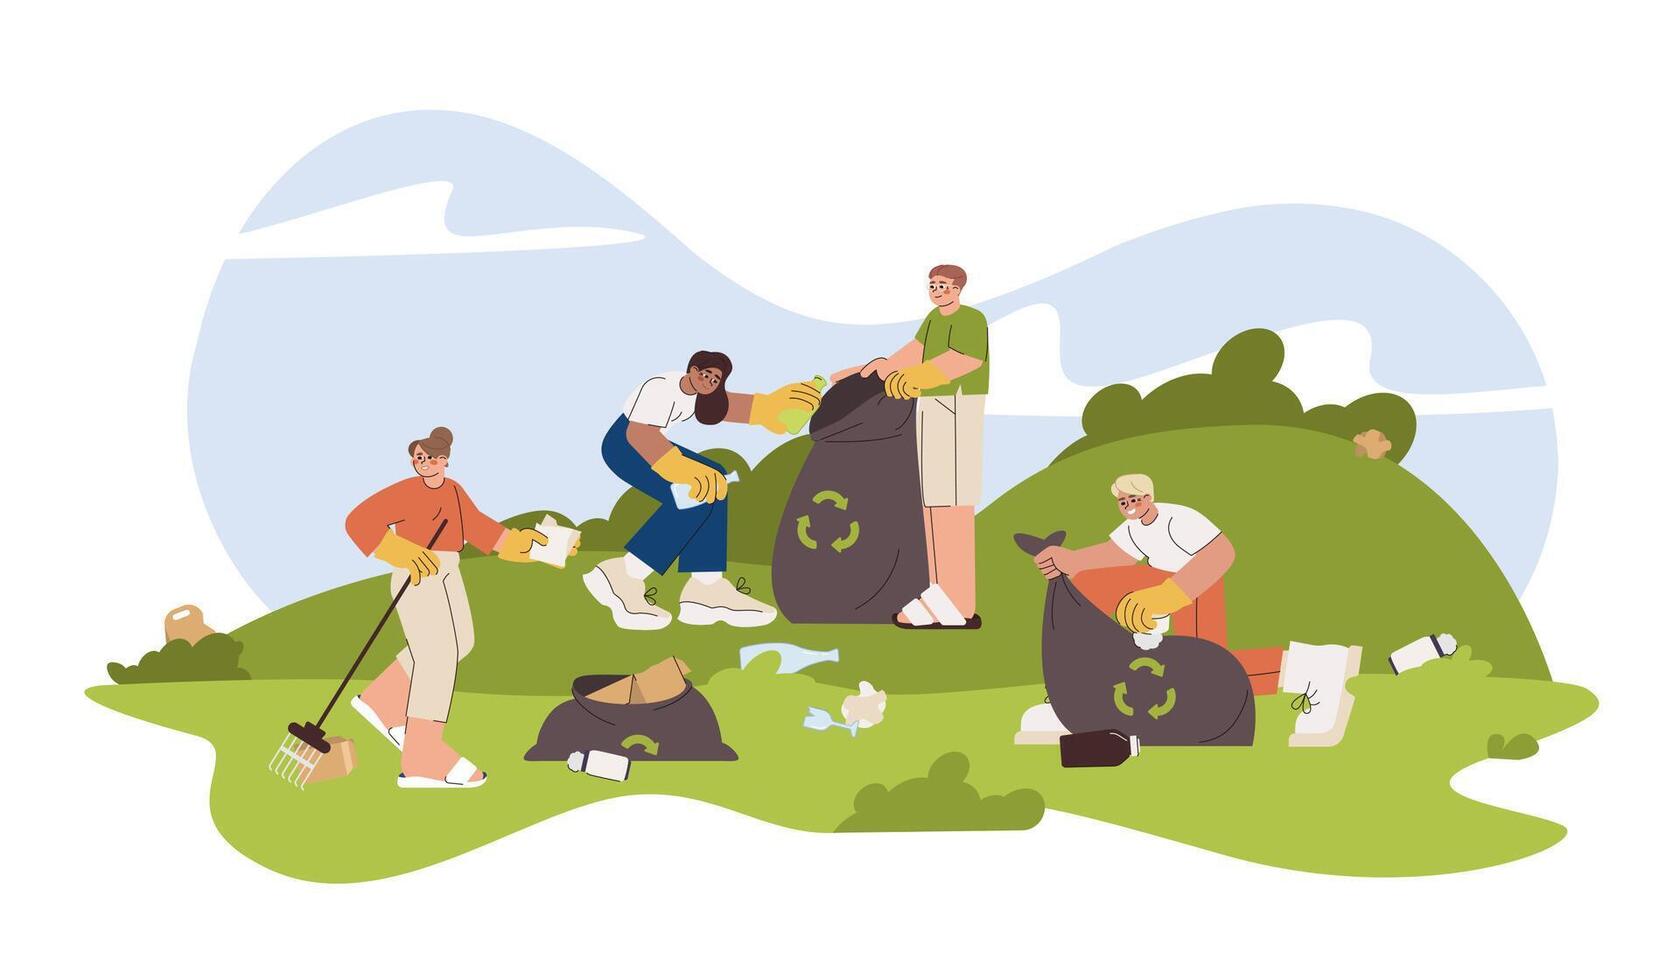 Flat volunteers collecting different garbage, pick up rubbish in public park. People with trash bags clean up waste, litter for recycle. Ecology protection, soil pollution, caring for the environment. vector